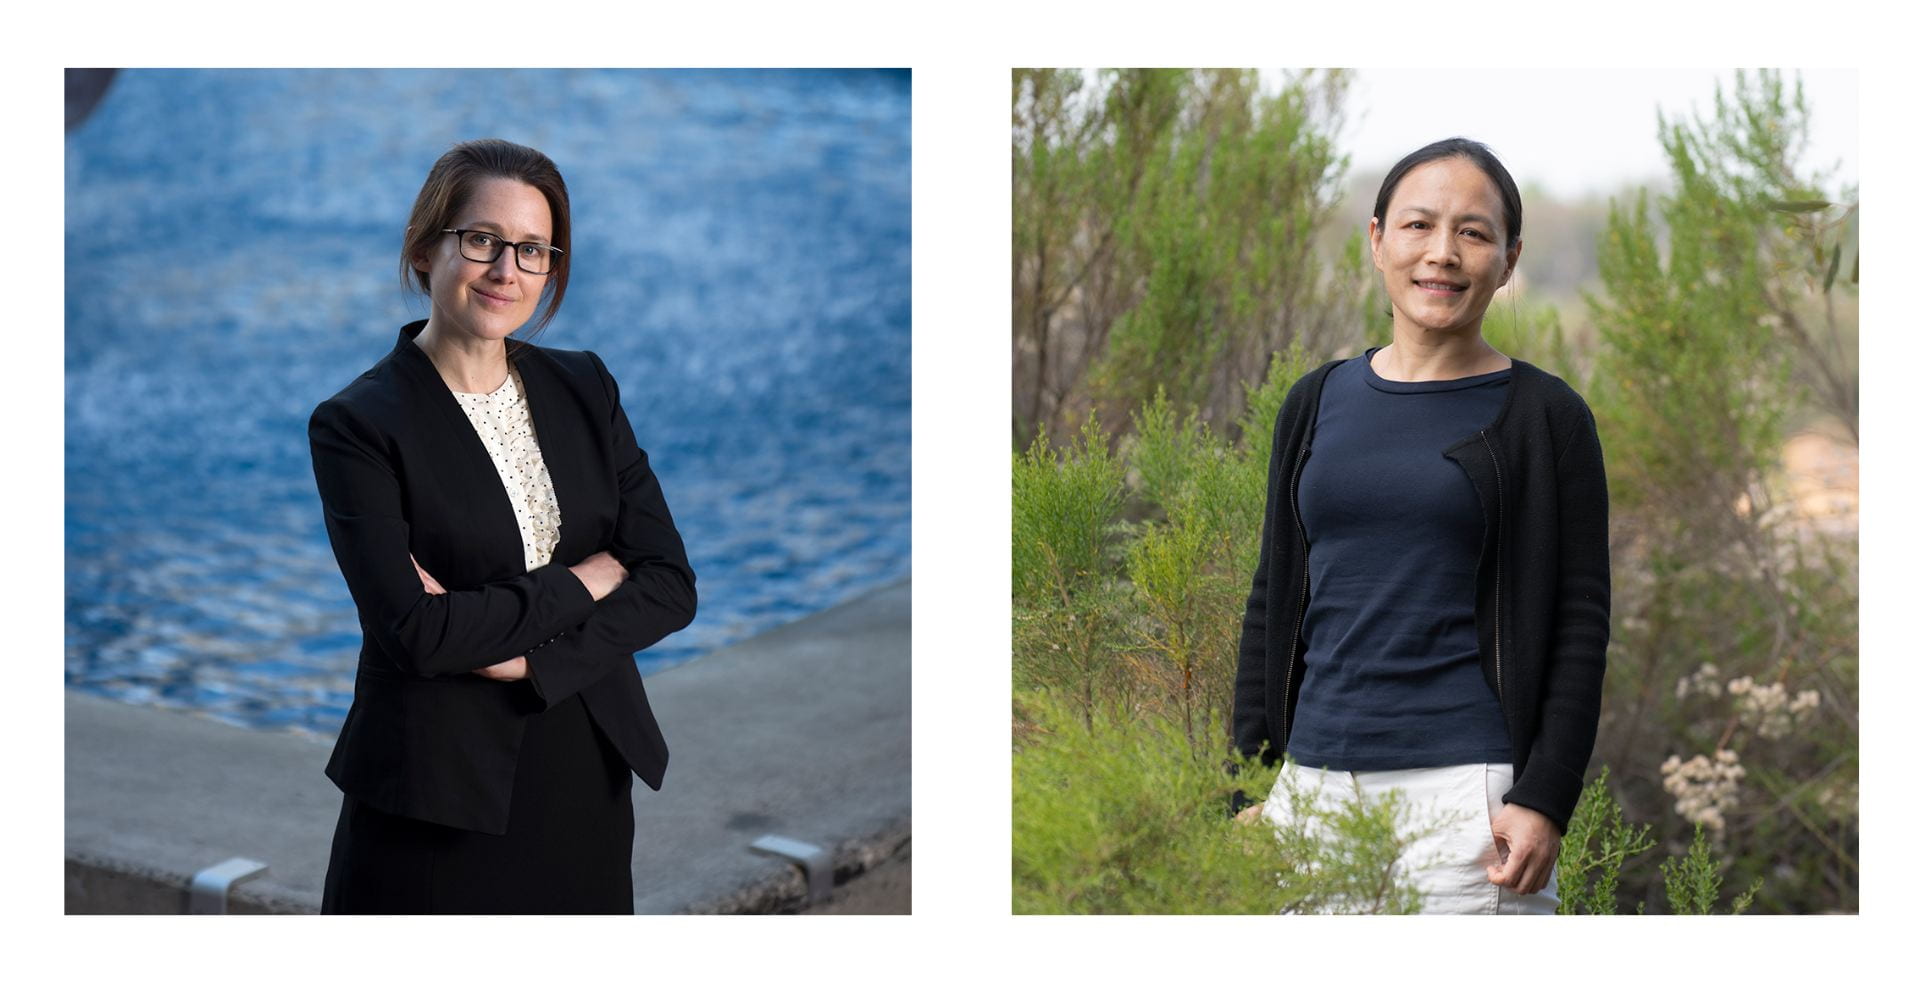 Photos of Maura Allaire, assistant professor of urban planning & public policy, and Jun Wu, professor of public health.